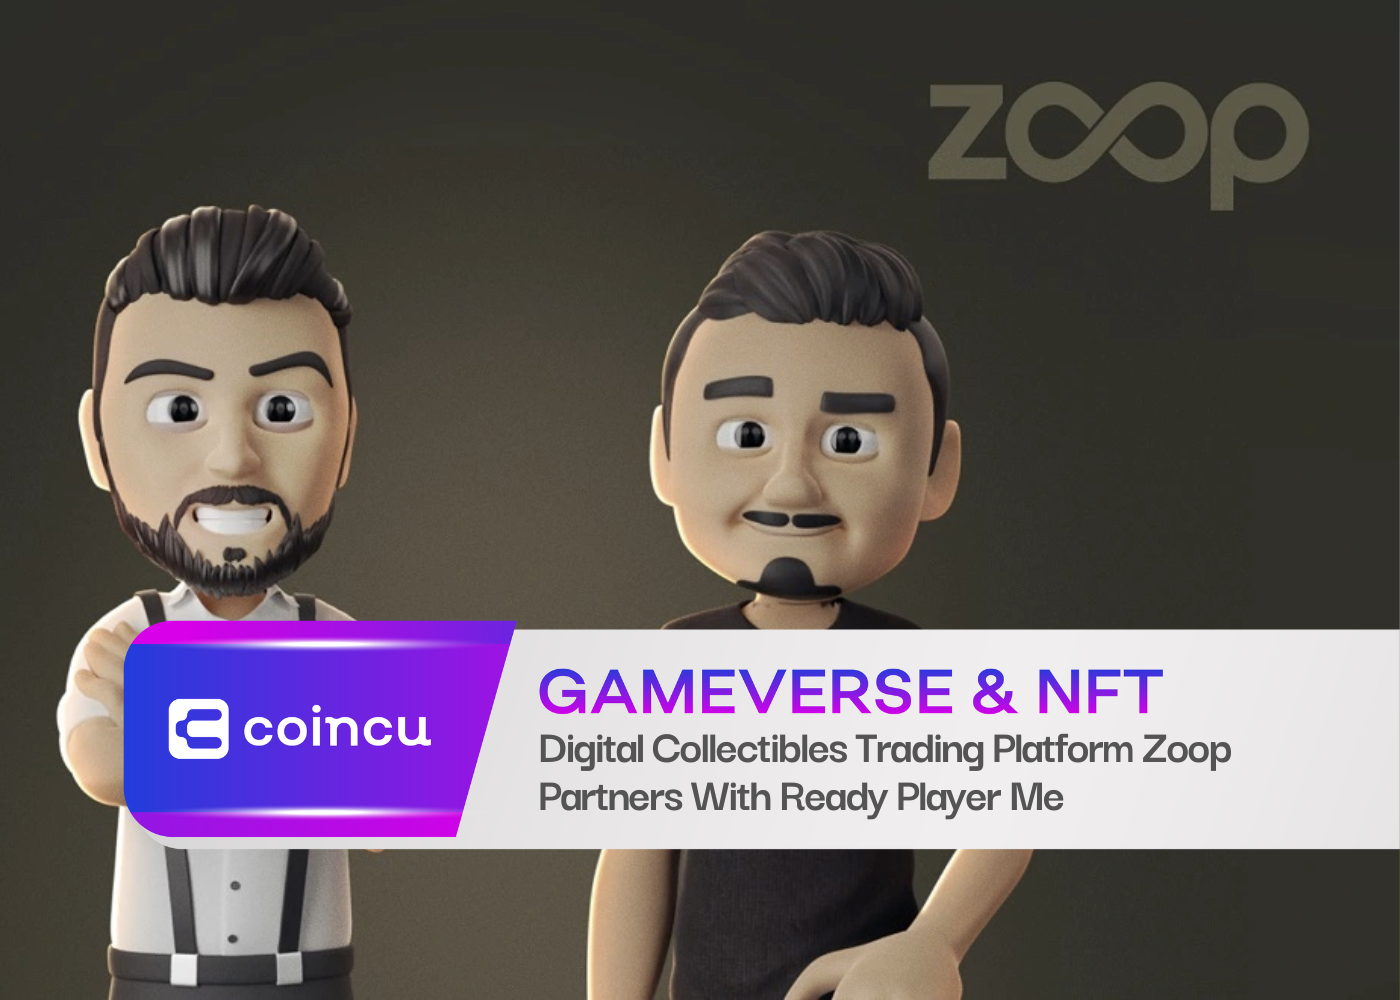 Digital Collectibles Trading Platform Zoop Partners With Ready Player Me